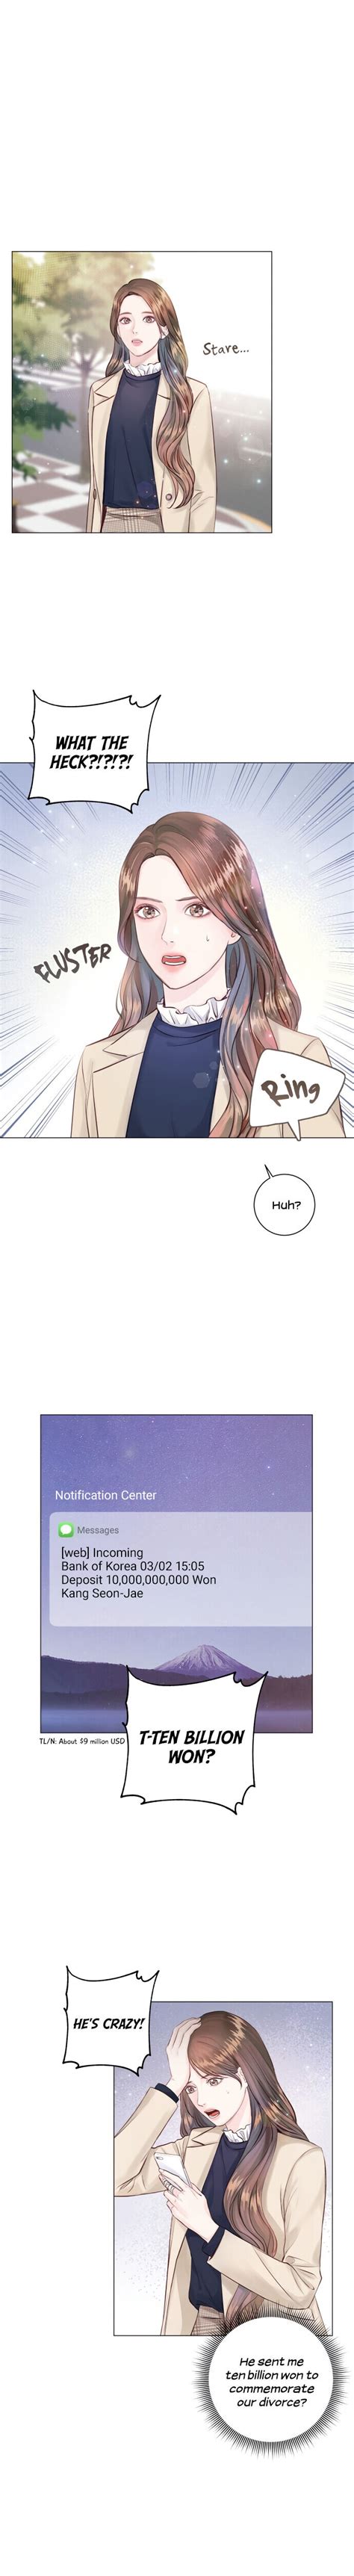 Real english version with high quality. Surely a Happy Ending - Chapter 3 - 1ST KISS MANGA